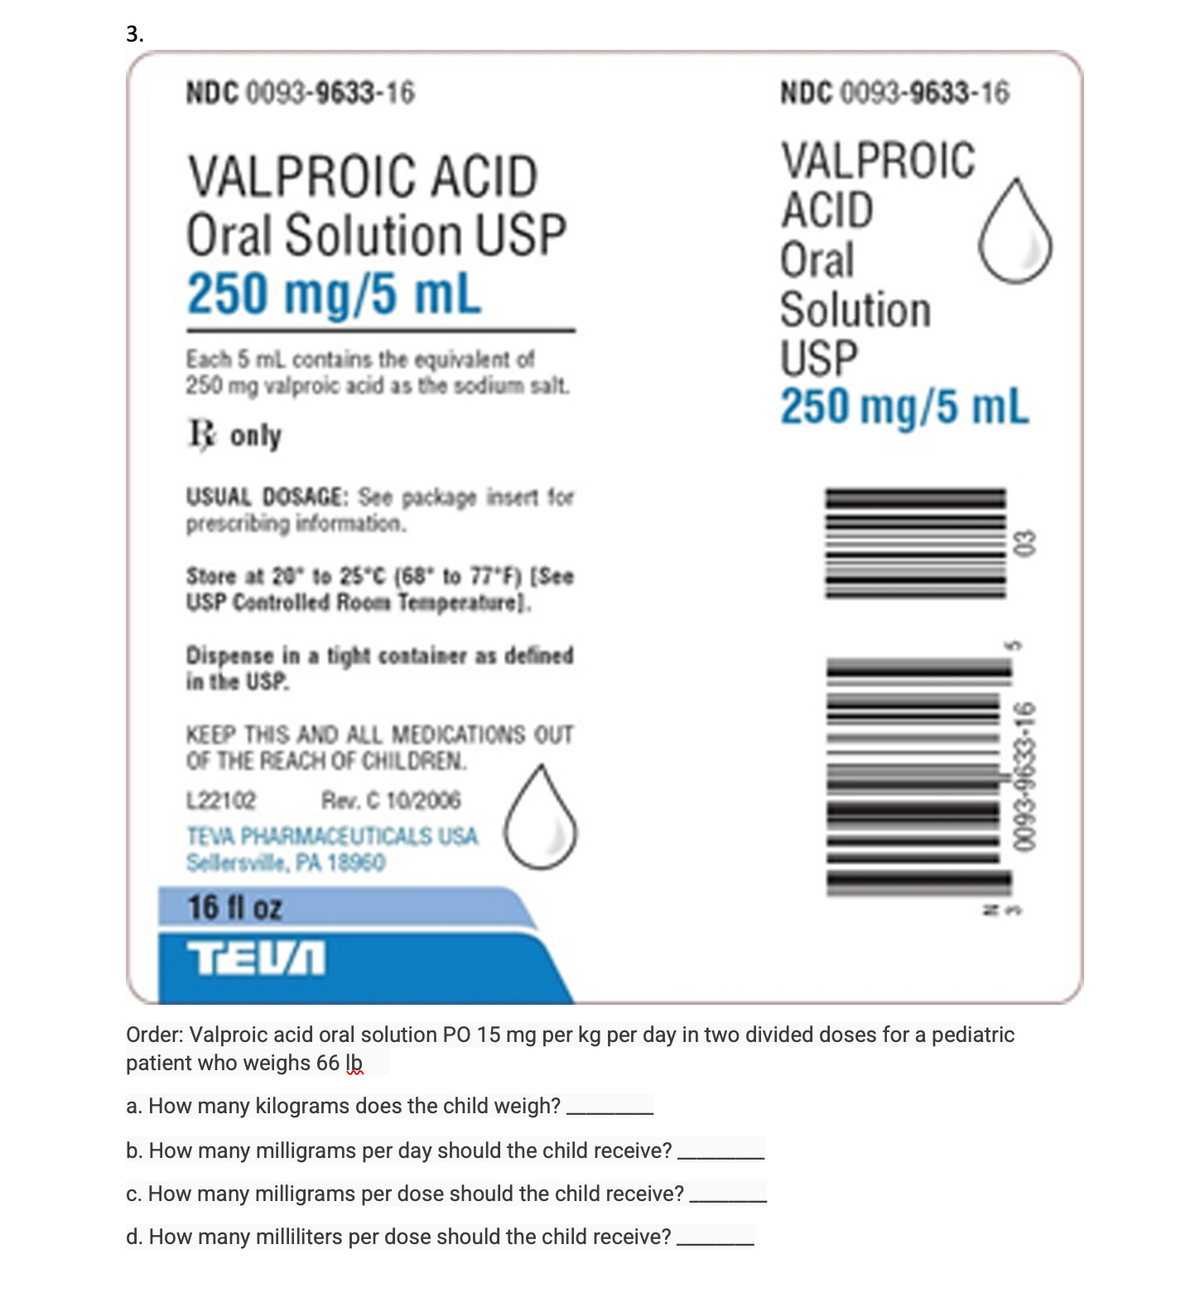 3.
NDC 0093-9633-16
VALPROIC ACID
Oral Solution USP
250 mg/5 mL
Each 5 mL contains the equivalent of
250 mg valproic acid as the sodium salt.
R only
USUAL DOSAGE: See package insert for
prescribing information.
Store at 20 to 25°C (68° to 77°F) [See
USP Controlled Room Temperature).
Dispense in a tight container as defined
in the USP.
KEEP THIS AND ALL MEDICATIONS OUT
OF THE REACH OF CHILDREN.
L22102
Rev. C 10/2006
TEVA PHARMACEUTICALS USA
Sellersville, PA 18960
16 fl oz
TEVA
NDC 0093-9633-16
VALPROIC
ACID
Oral
Solution
USP
250 mg/5 mL
O
03
0093-9633-16
Order: Valproic acid oral solution PO 15 mg per kg per day in two divided doses for a pediatric
patient who weighs 66 lb
a. How many kilograms does the child weigh?
b. How many milligrams per day should the child receive?
c. How many milligrams per dose should the child receive?
d. How many milliliters per dose should the child receive?